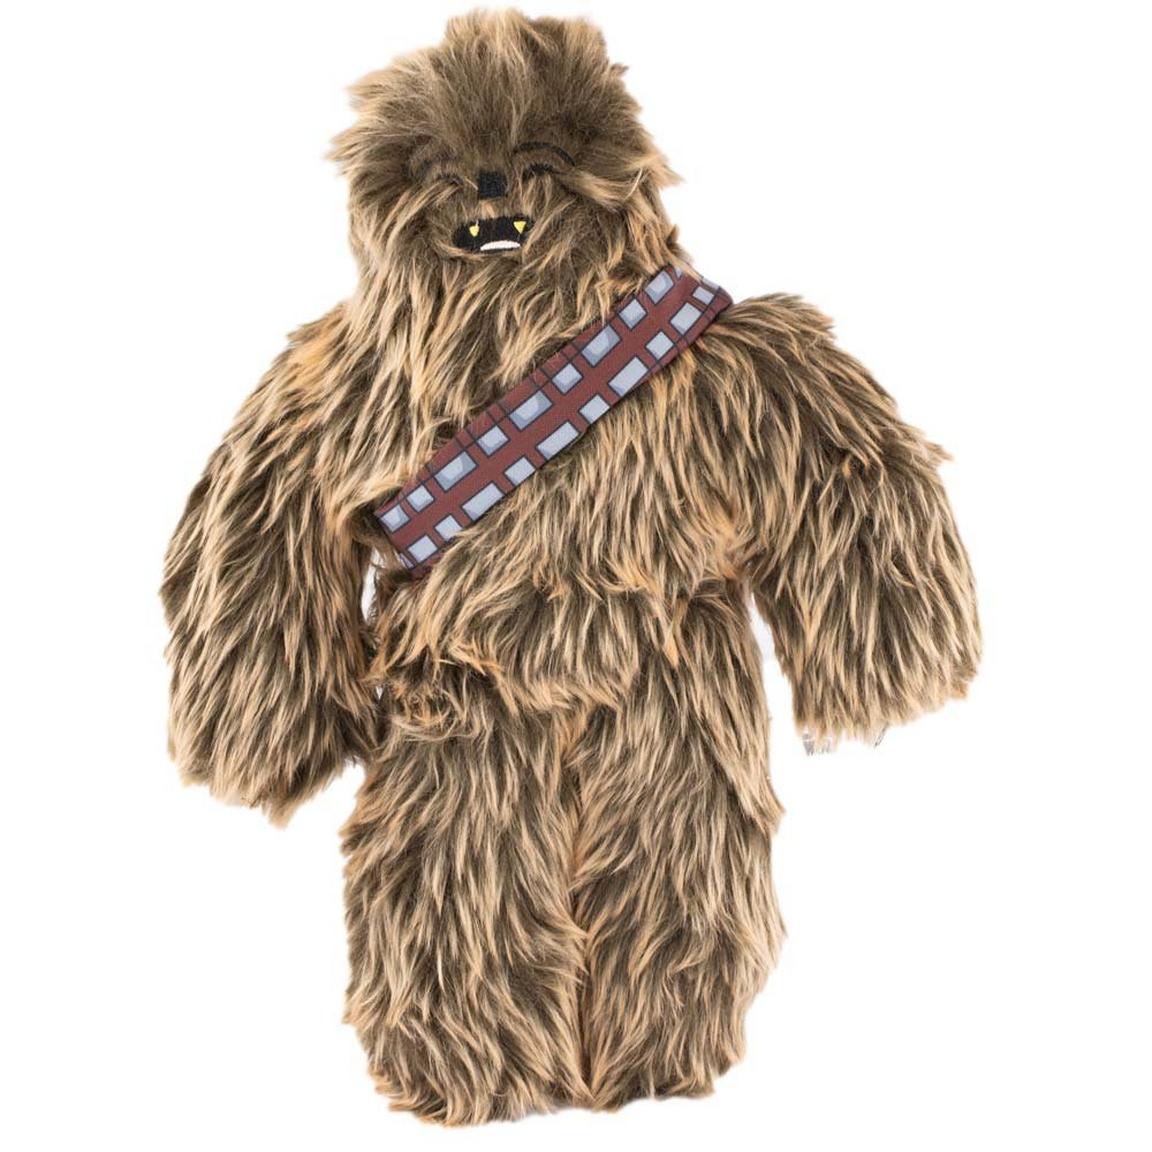 Buckle Down Buckle-Down Star Wars Chewbacca Dog Toy Squeaker Plush Toy